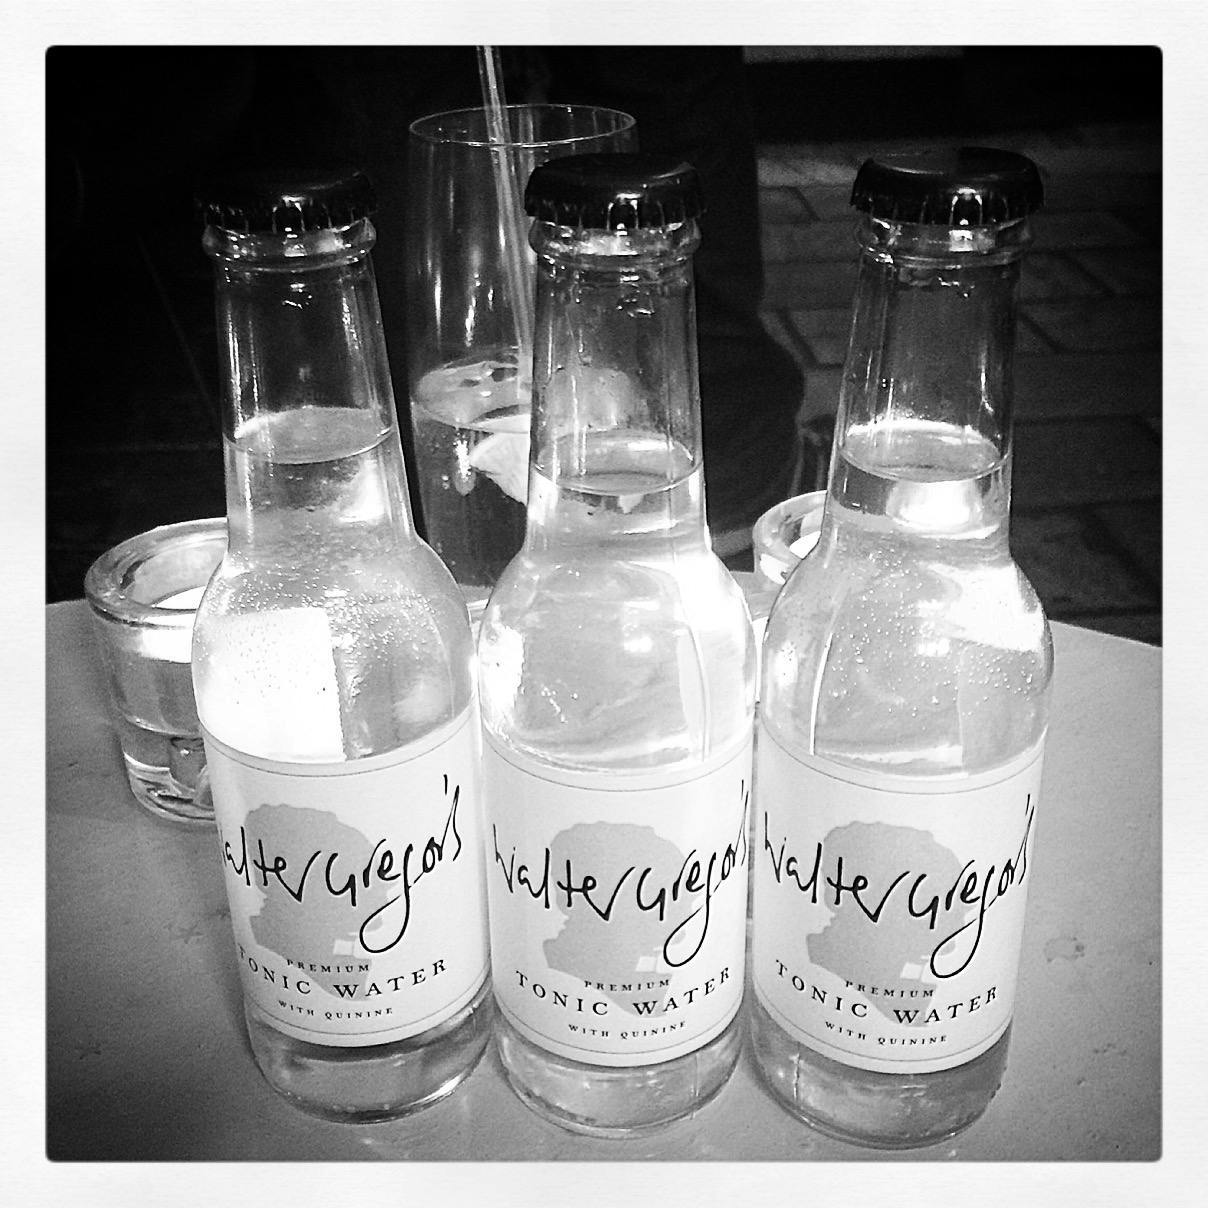 Take a taste of Scotland's First Tonic Water, Walter Gregor from Summerhouse Drinks